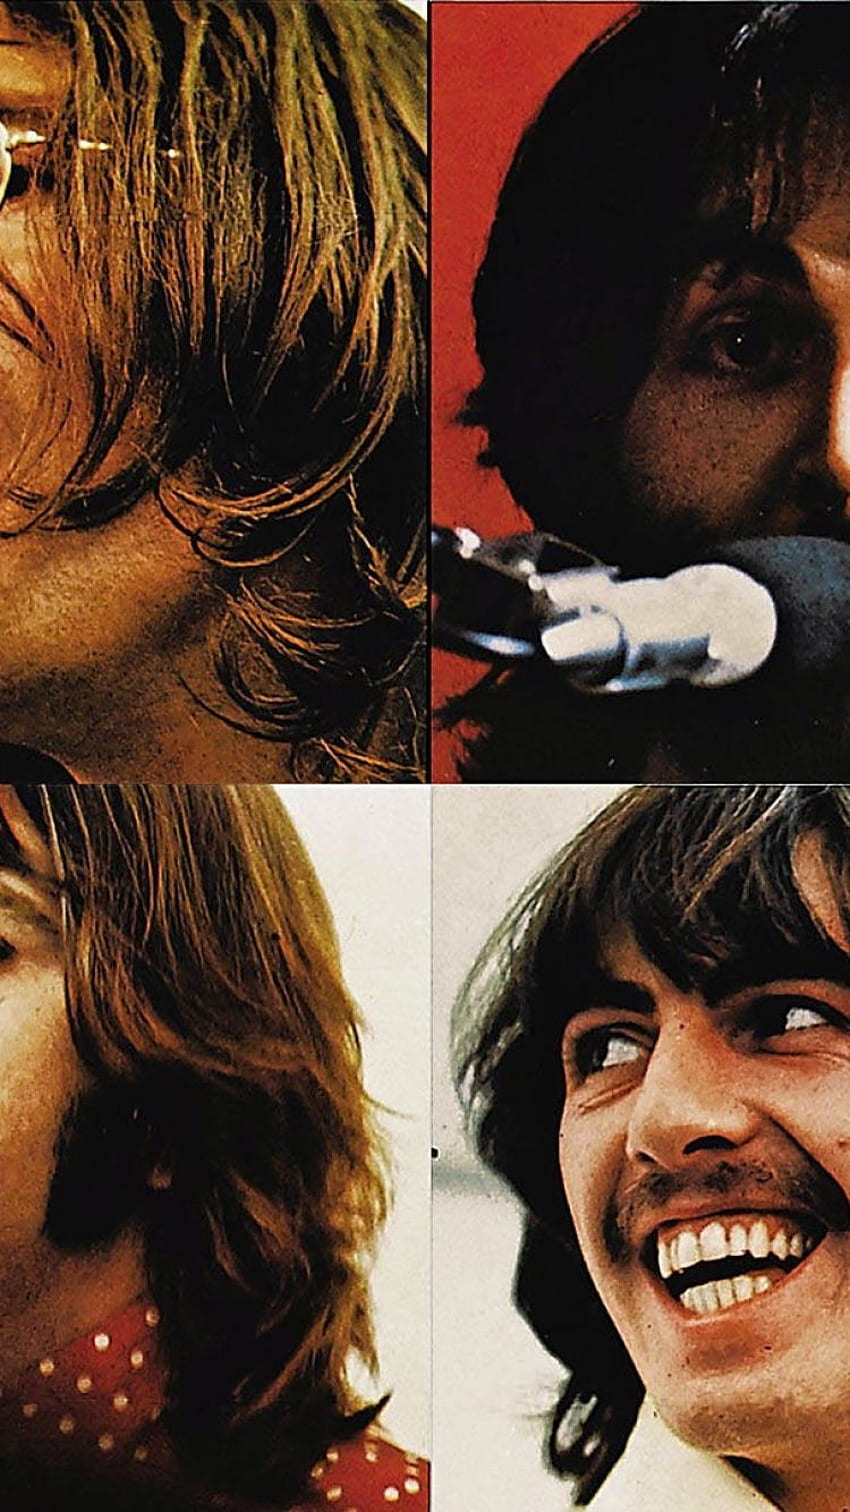 the beatles wallpaper let it be